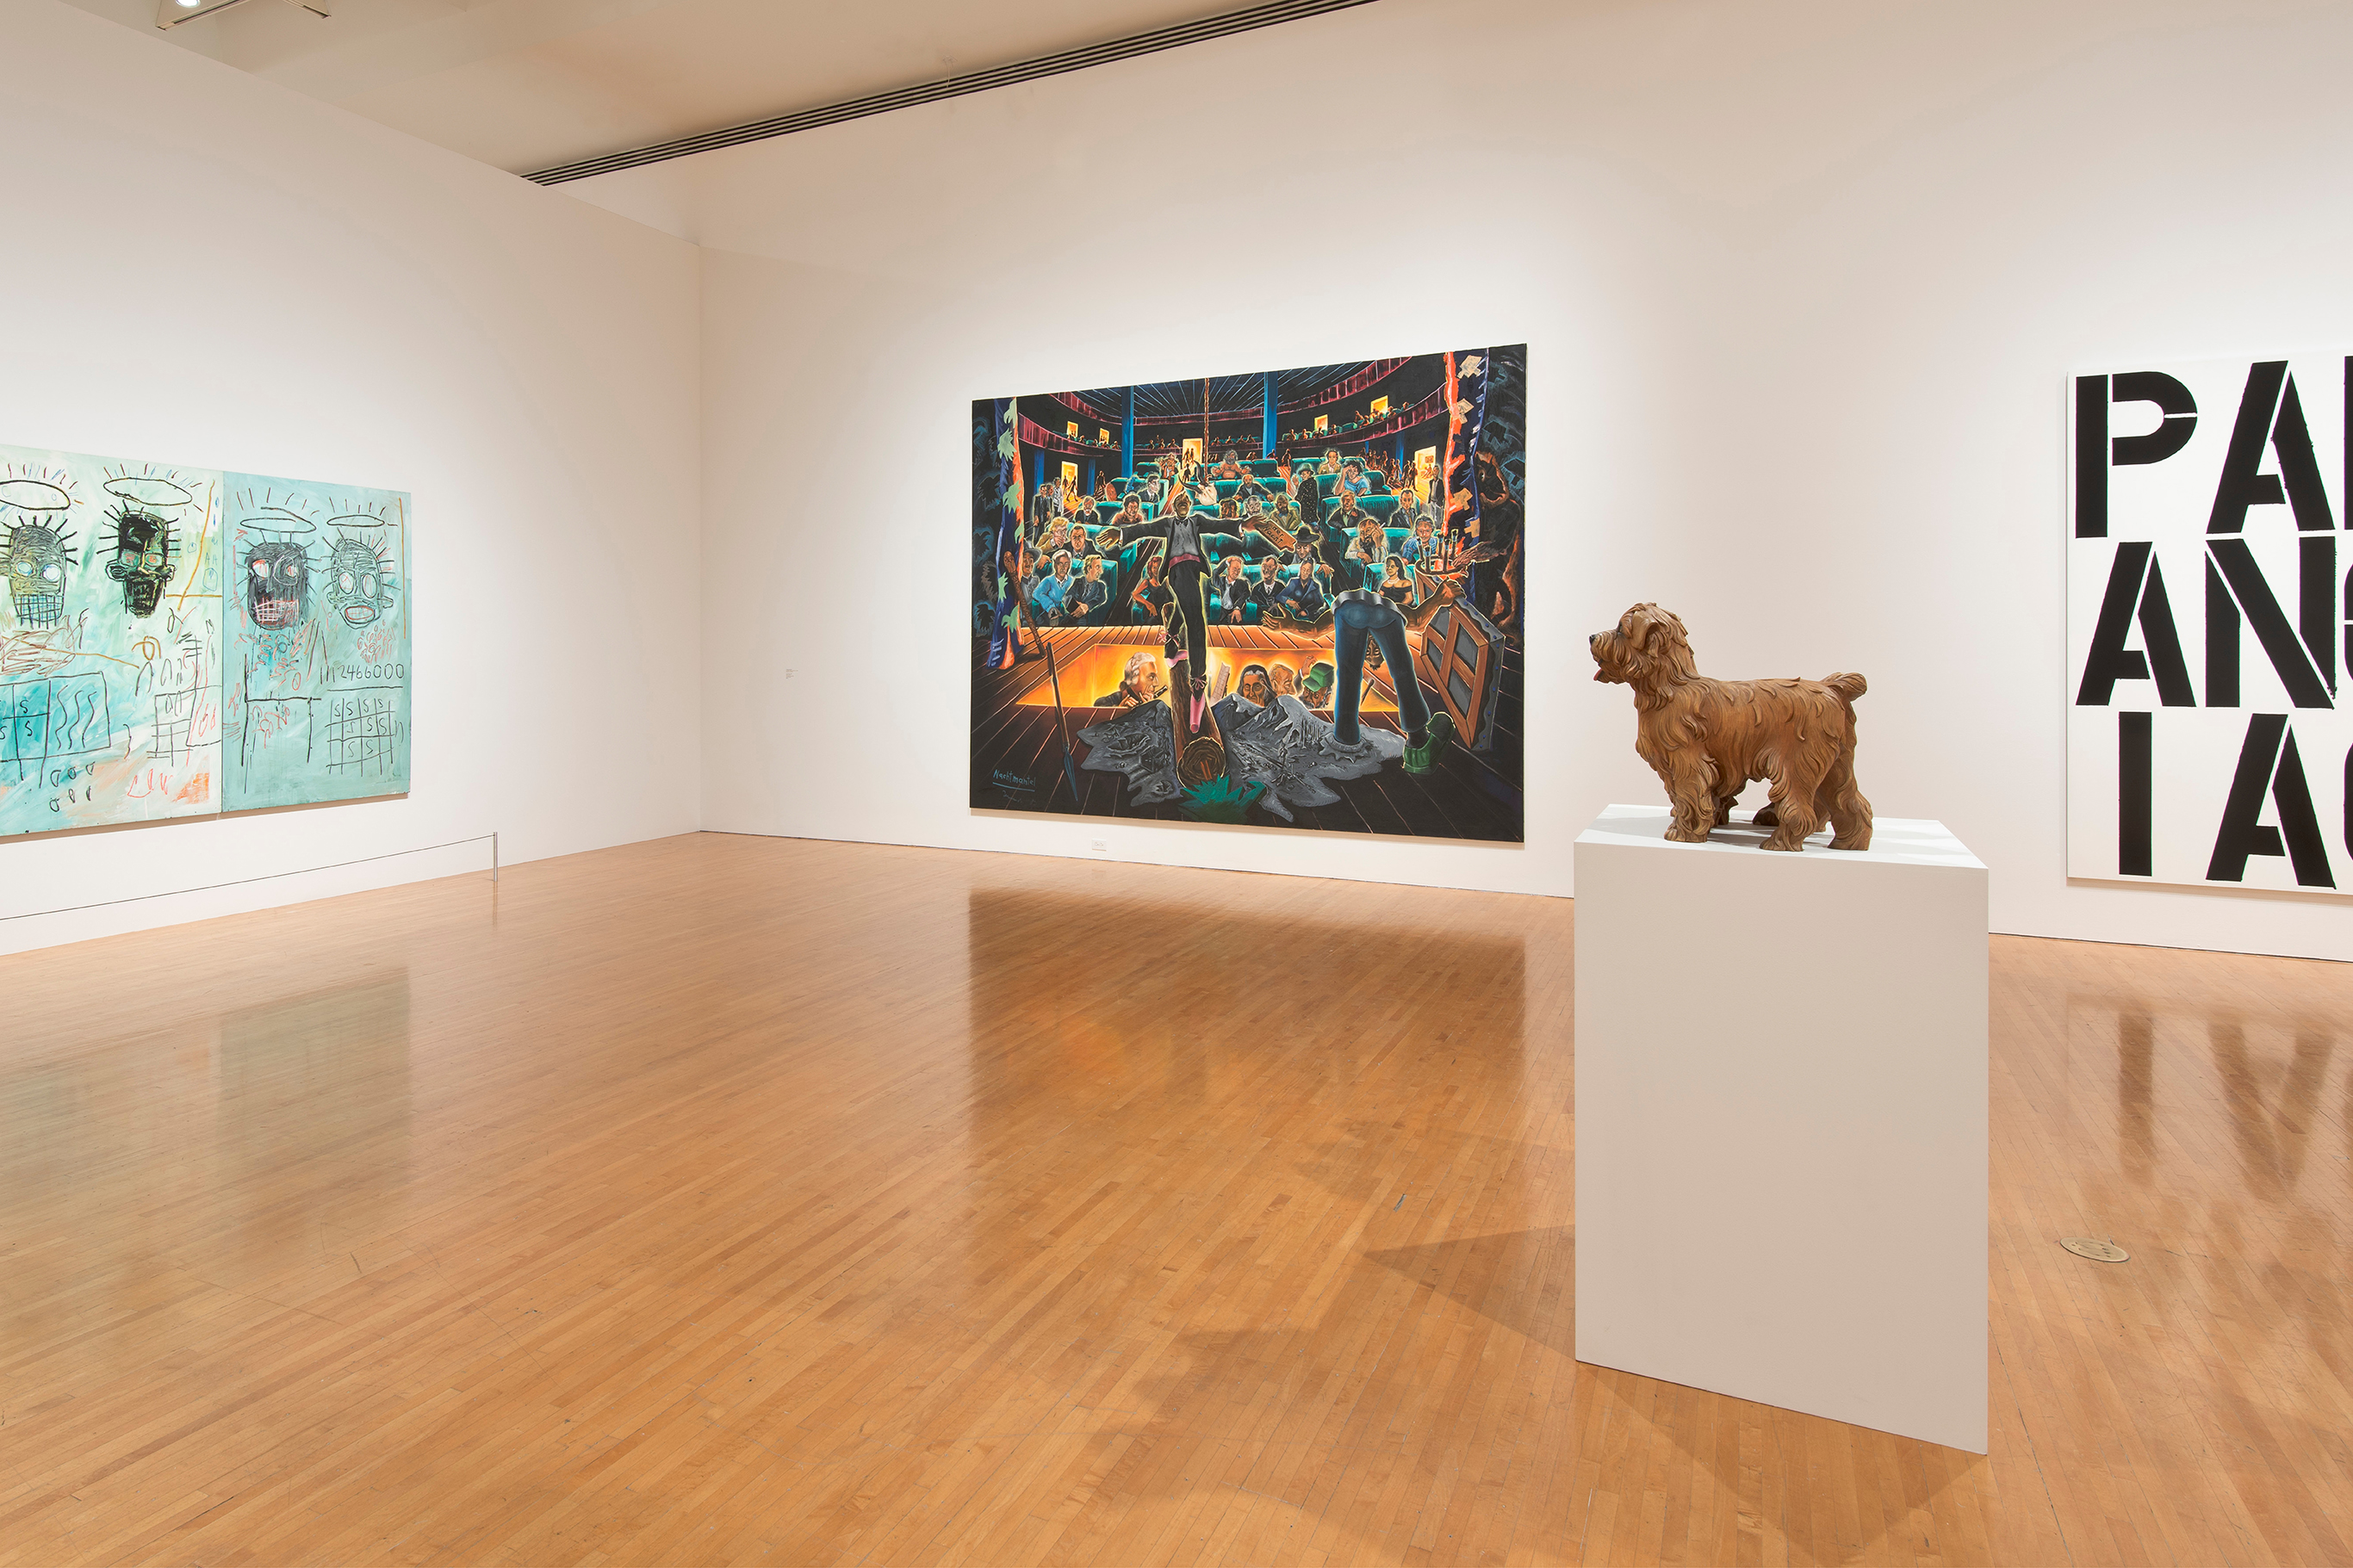 Art Exhibition featuring paintings and a dog sculpture at The Museum of Contemporary Art